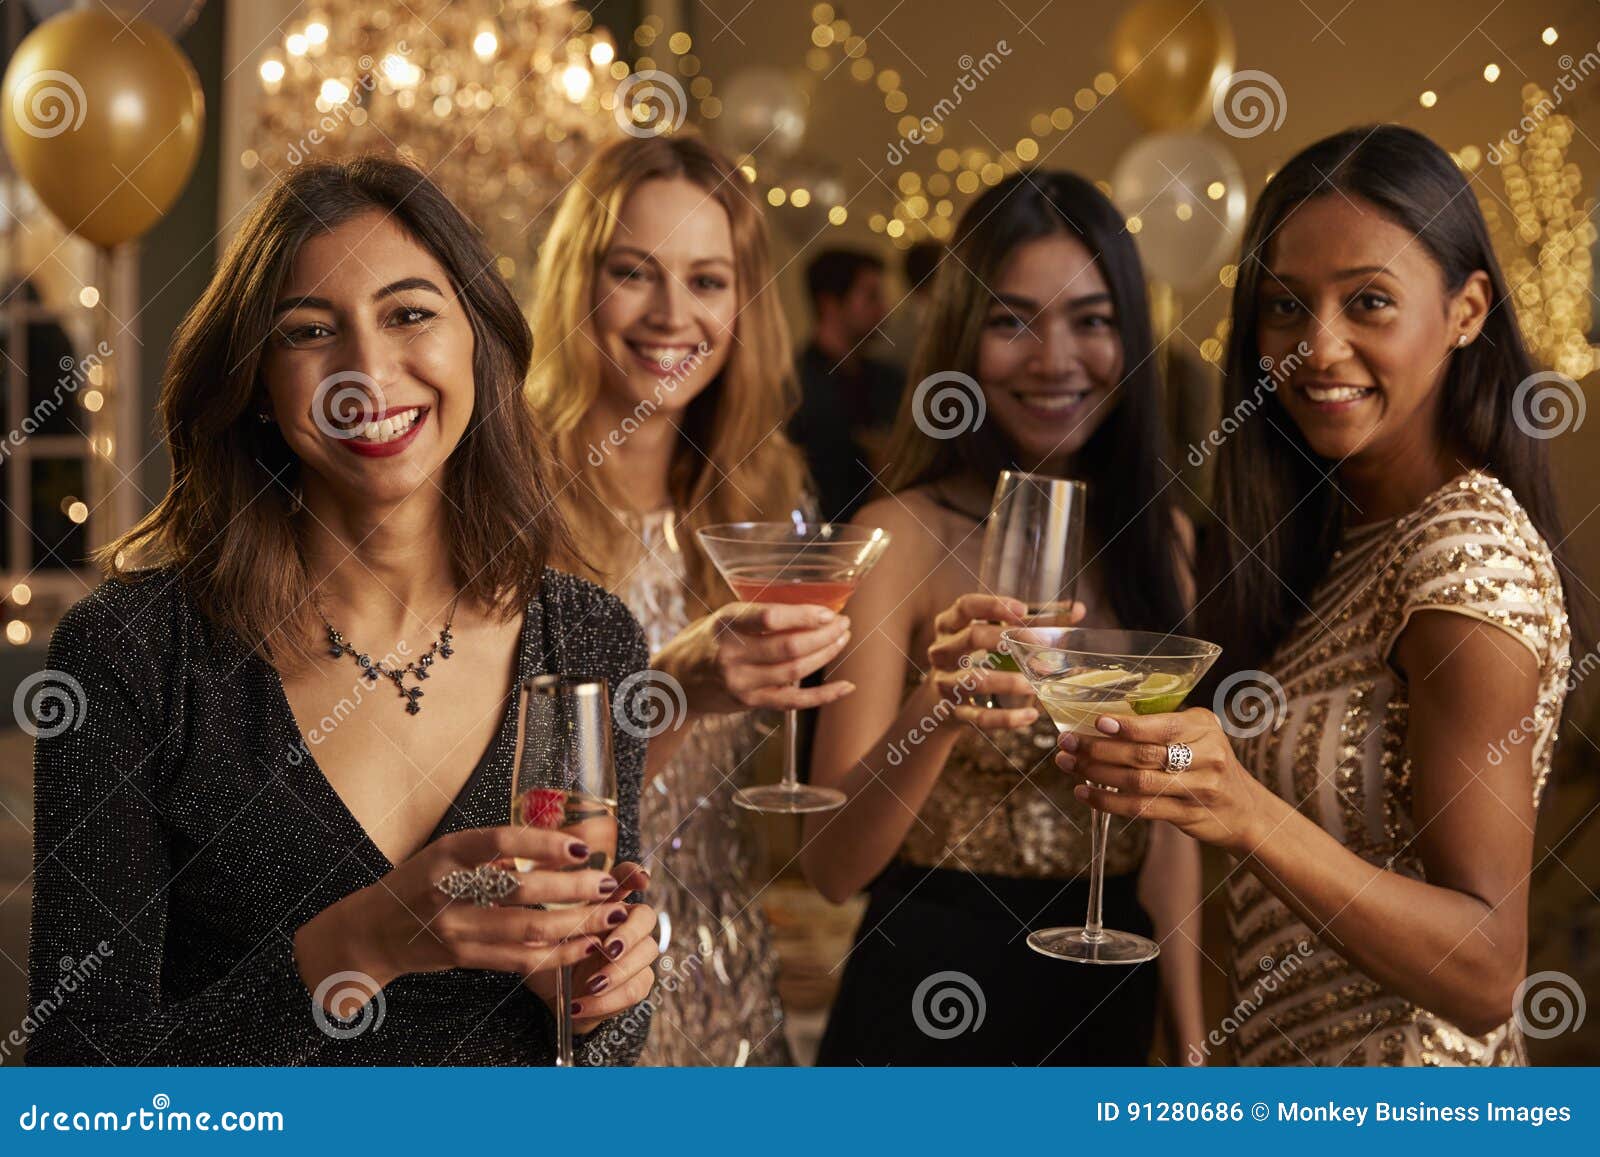 female friends celebrating at party make toast to camera